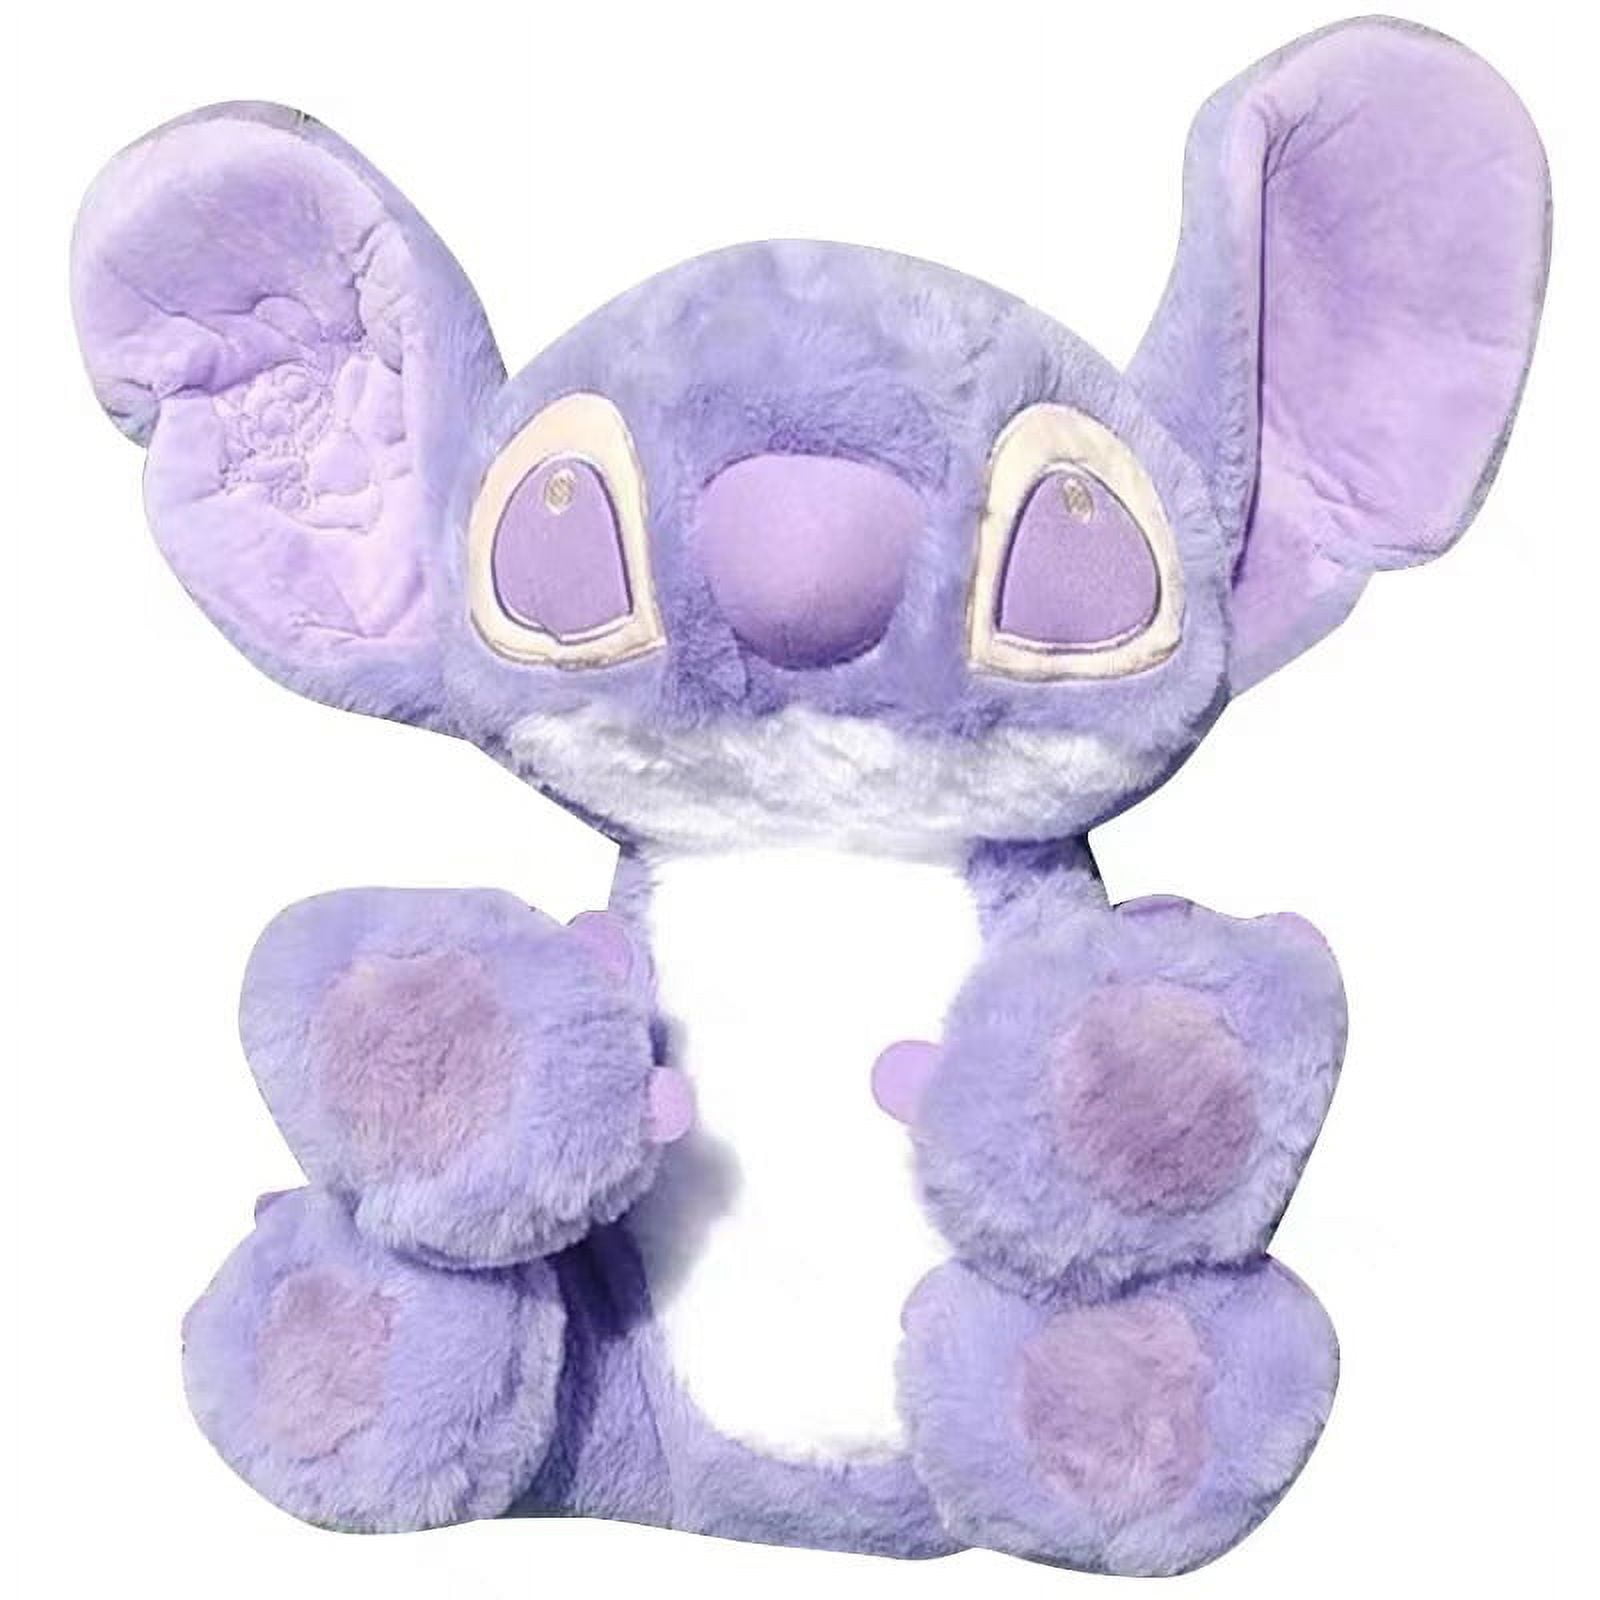 Disney Store Stitch Plush Soft Toy, Medium 15 3/4 inches, Lilo & Stitch,  Cuddly Alien Soft Toy with Big Floppy Ears and Fuzzy Texture, Suitable for